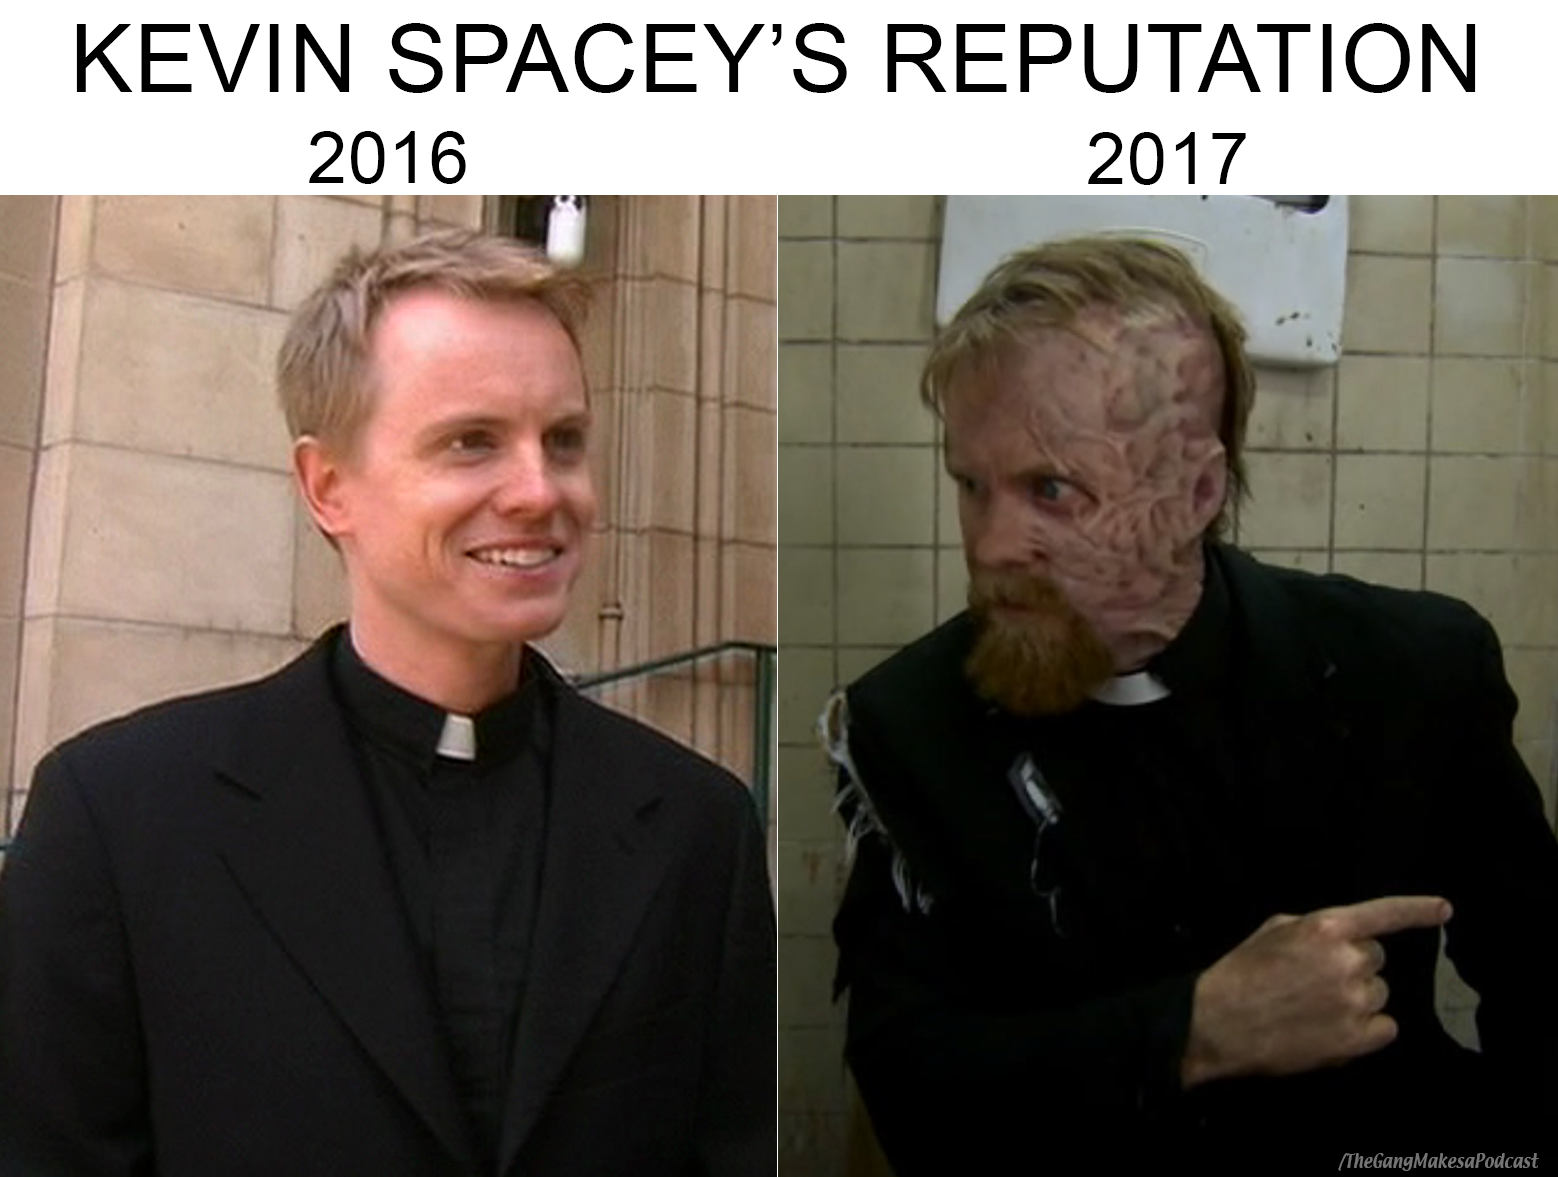 Kevin Spacey's reputation...